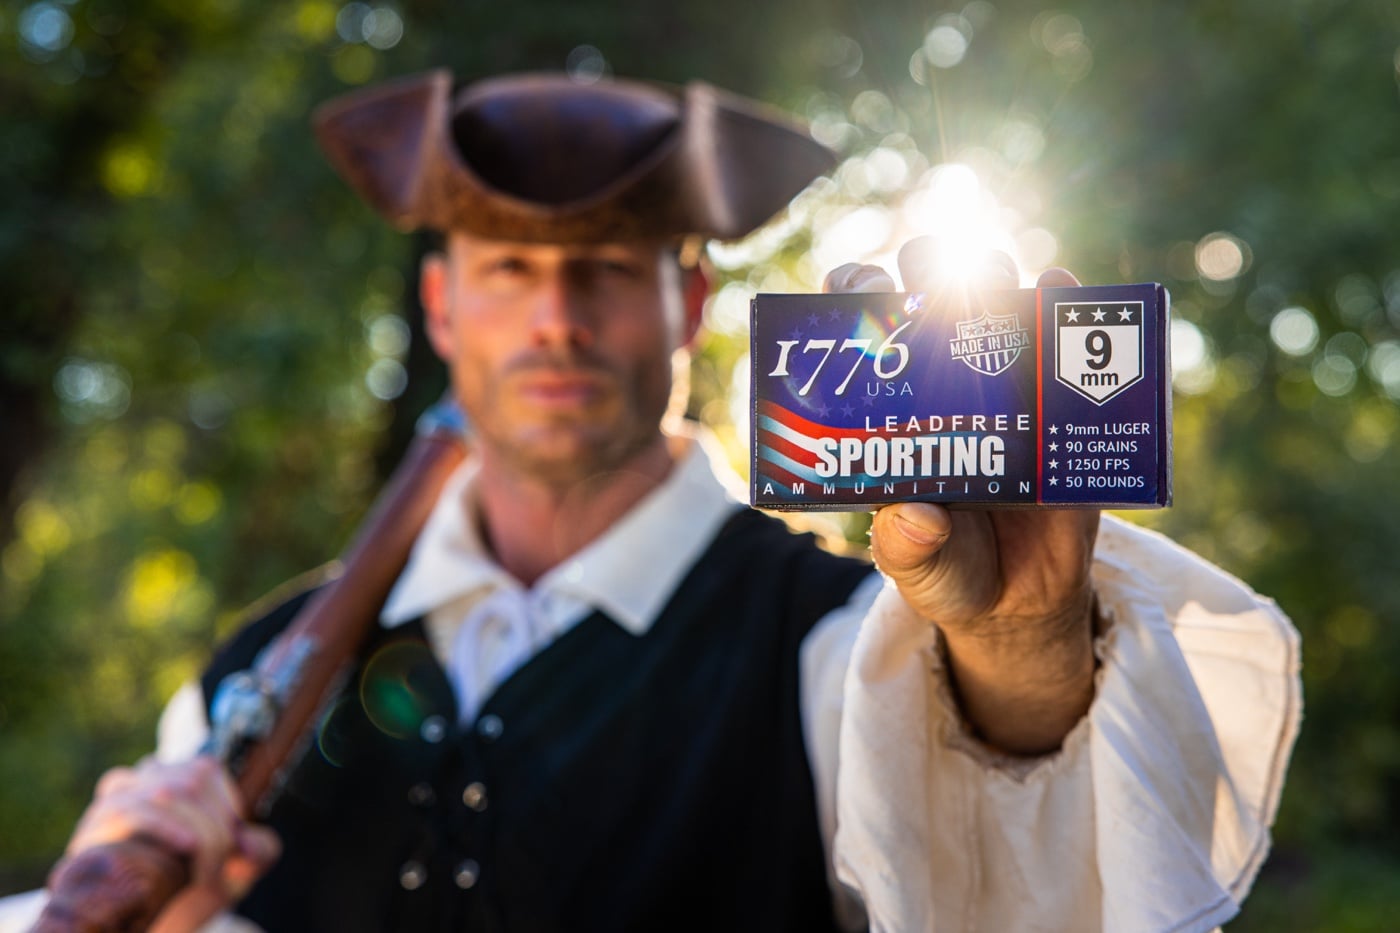 1776 usa lead free ammo review